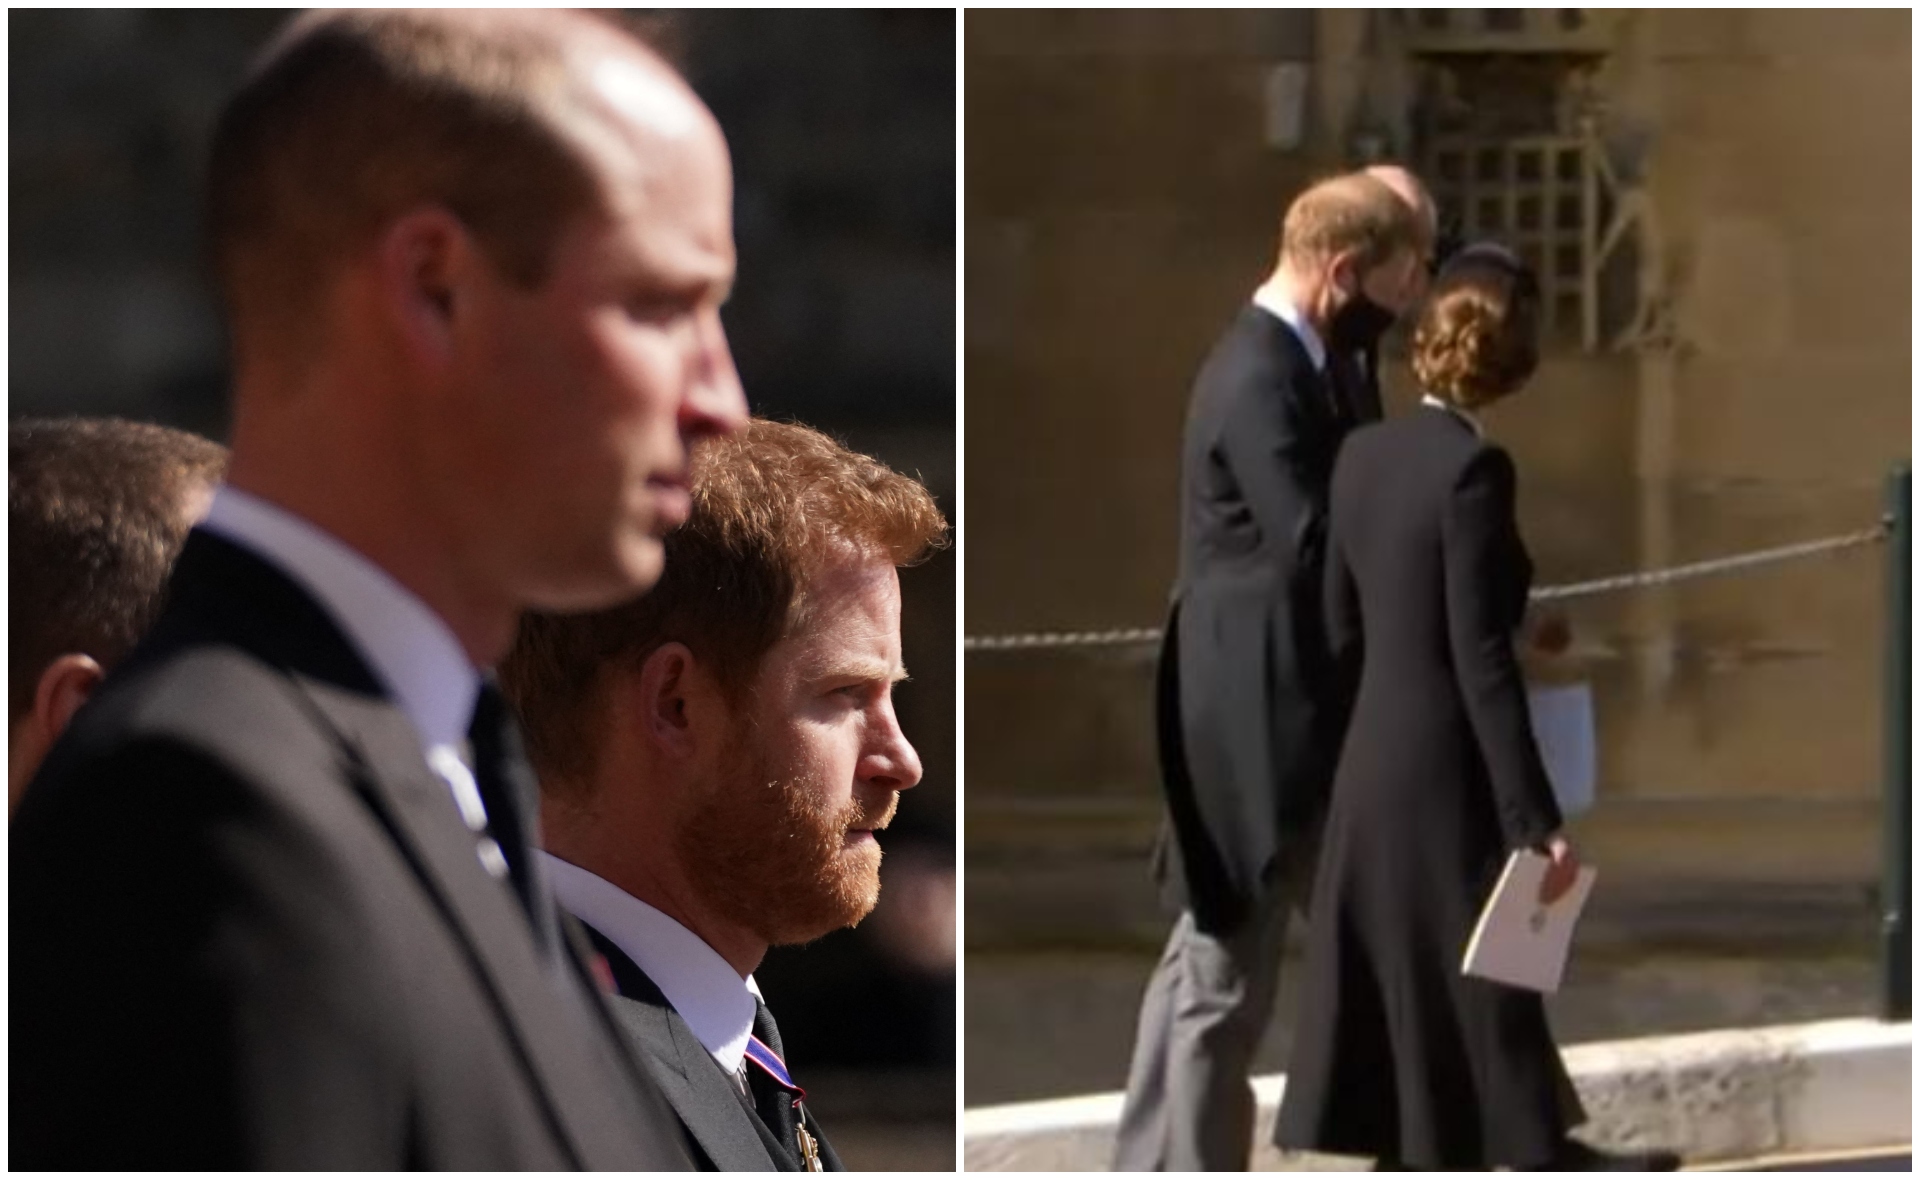 Prince Harry & Prince William share an emotional conversation with Duchess Catherine after Philip’s funeral – their first reunion in over a year